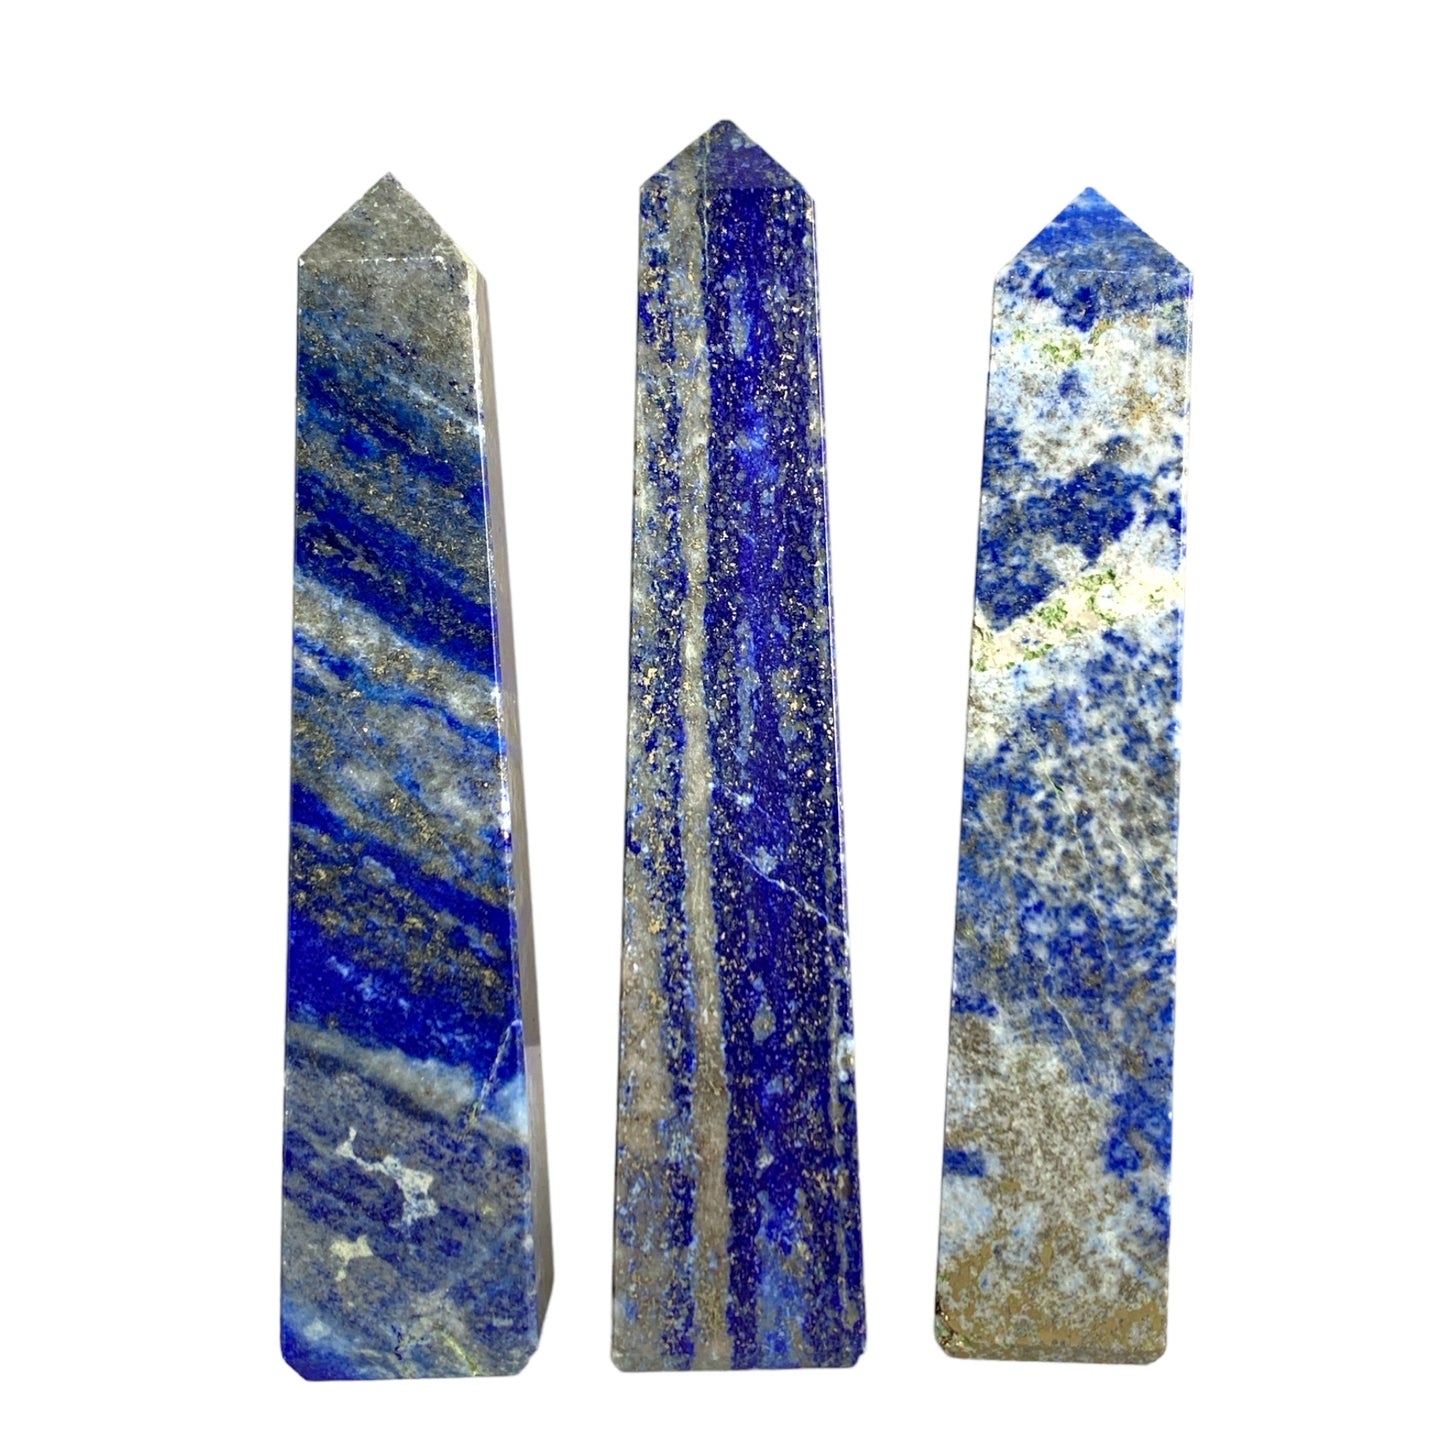 Lapis Lazuli - 3 to 5 inches - Price per gram per piece (B2B ordering 1 = 1 Tower so we charge Ex. 80g = $9.60 each) - Polished Towers